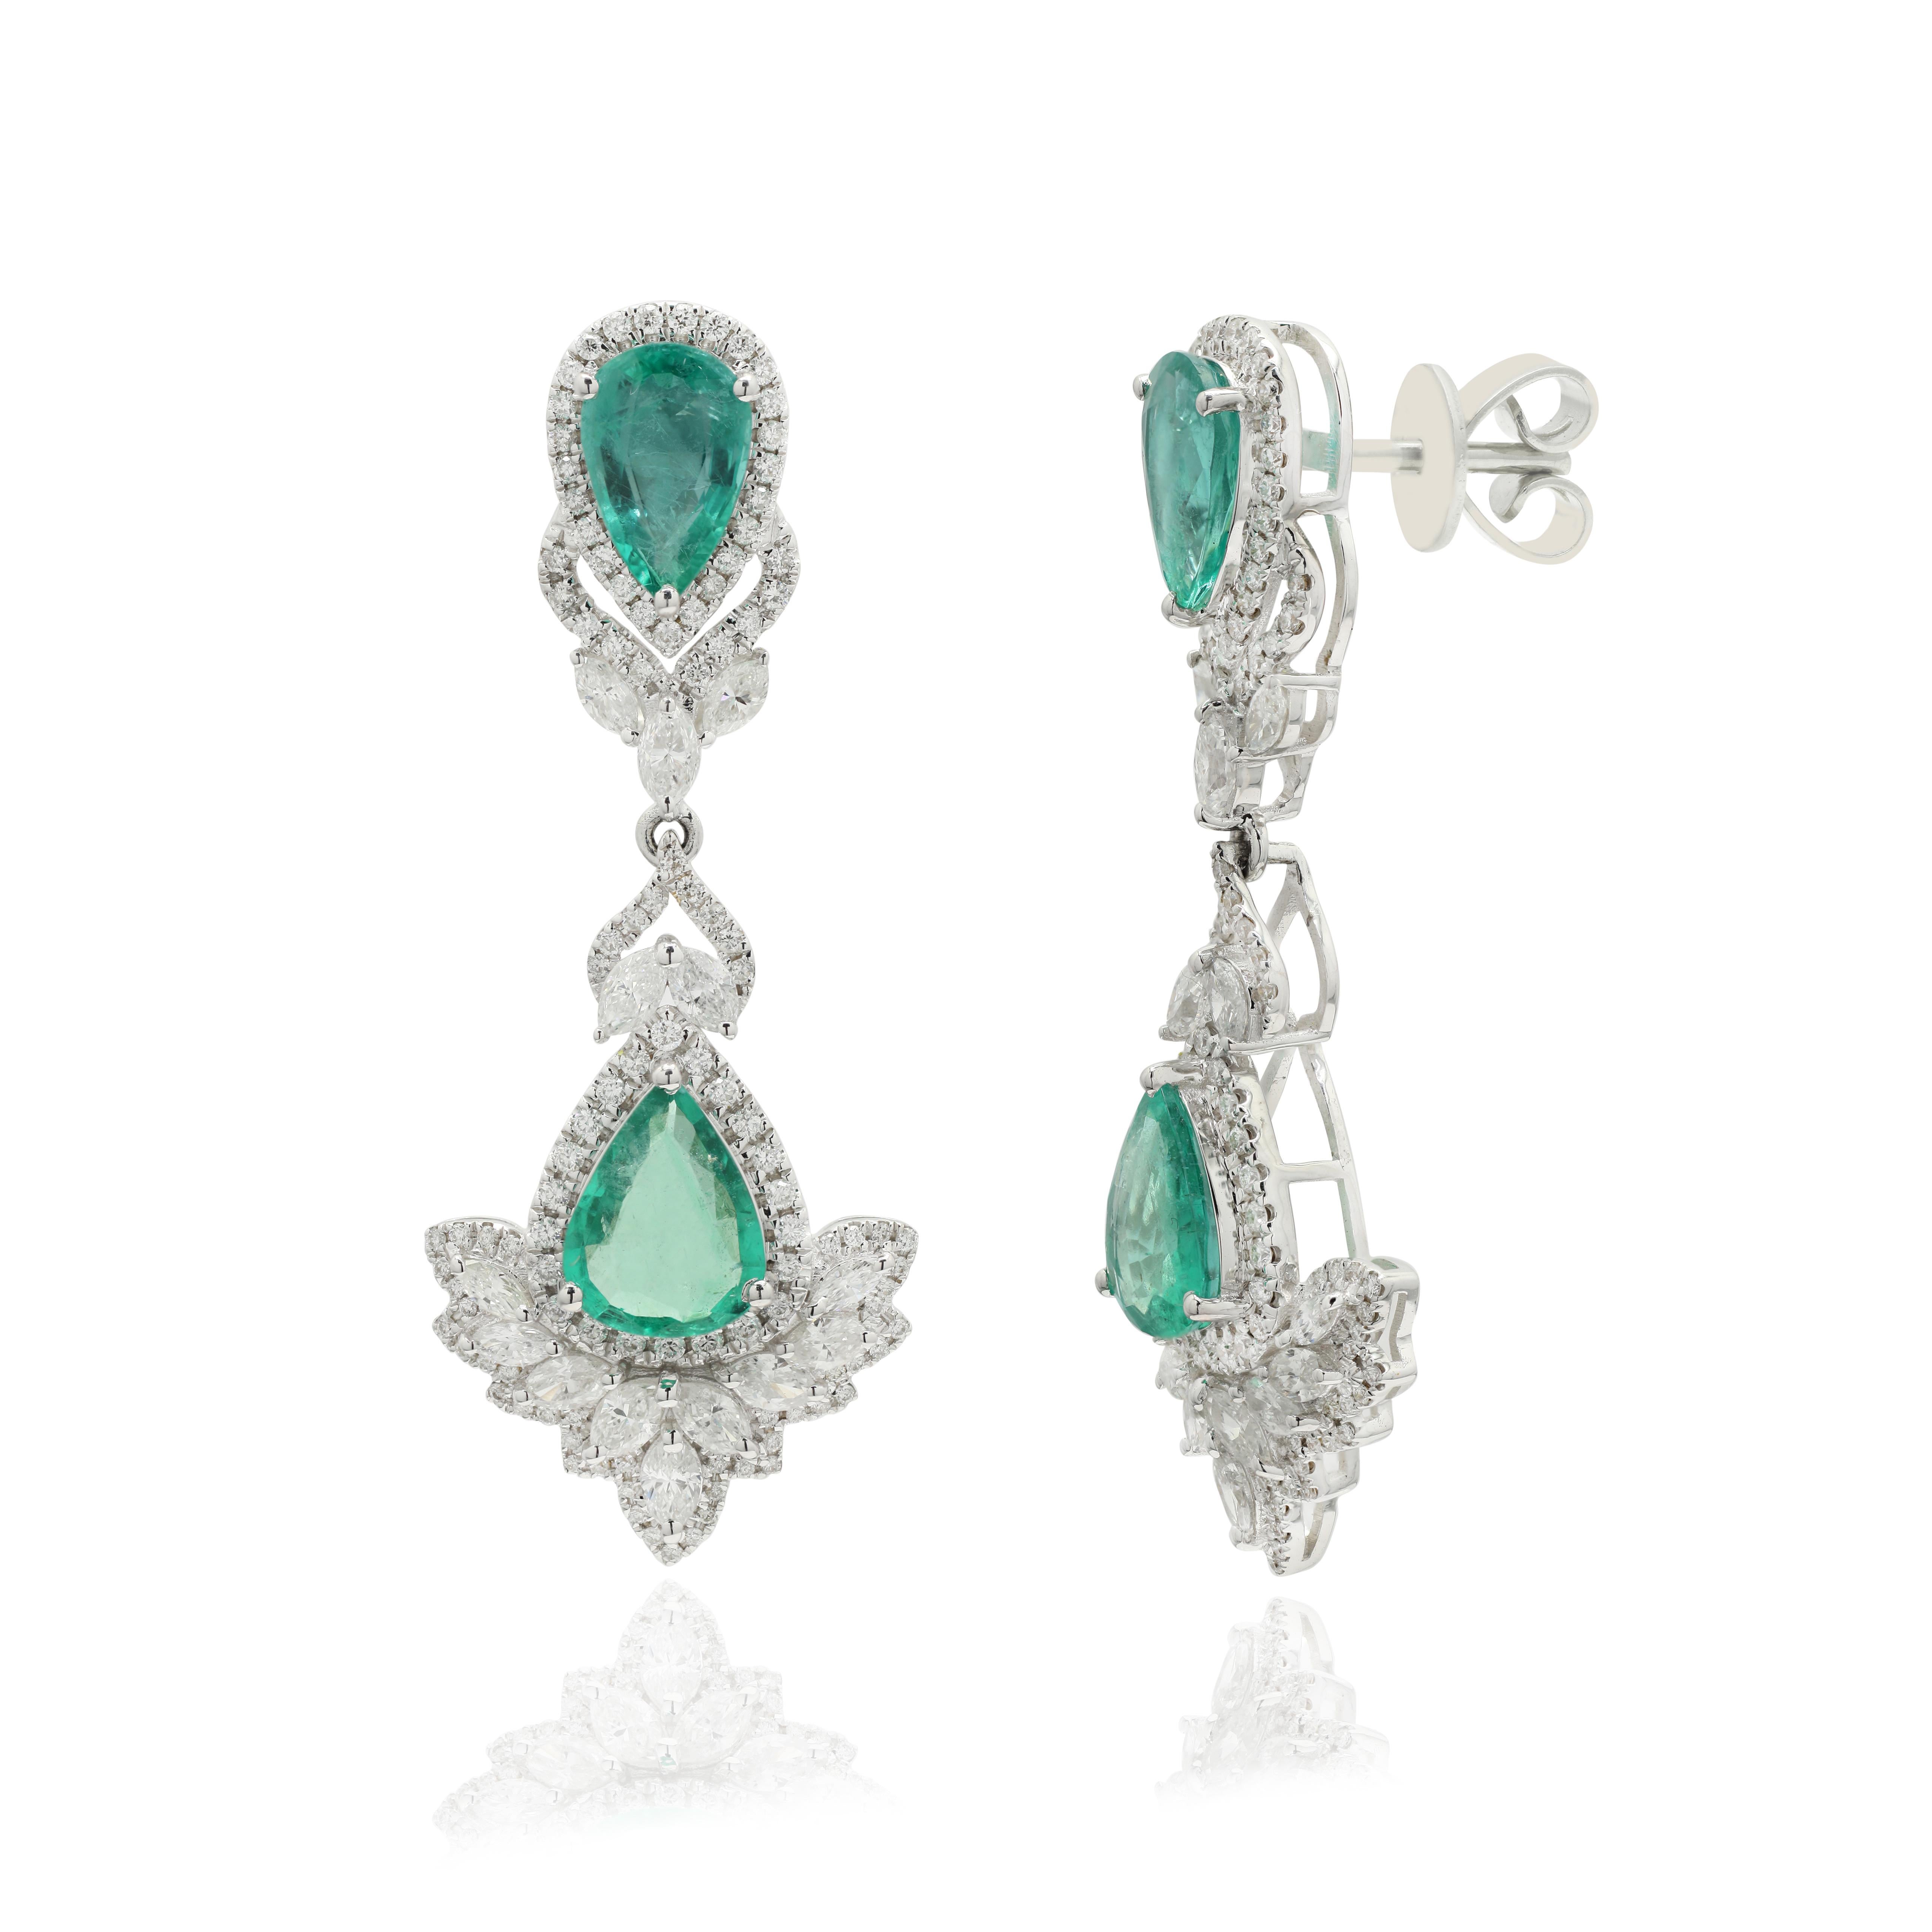 Emerald and Diamond Dangle earrings to make a statement with your look. These earrings create a sparkling, luxurious look featuring pear cut gemstone.
If you love to gravitate towards unique styles, this piece of jewelry is perfect for you.

PRODUCT